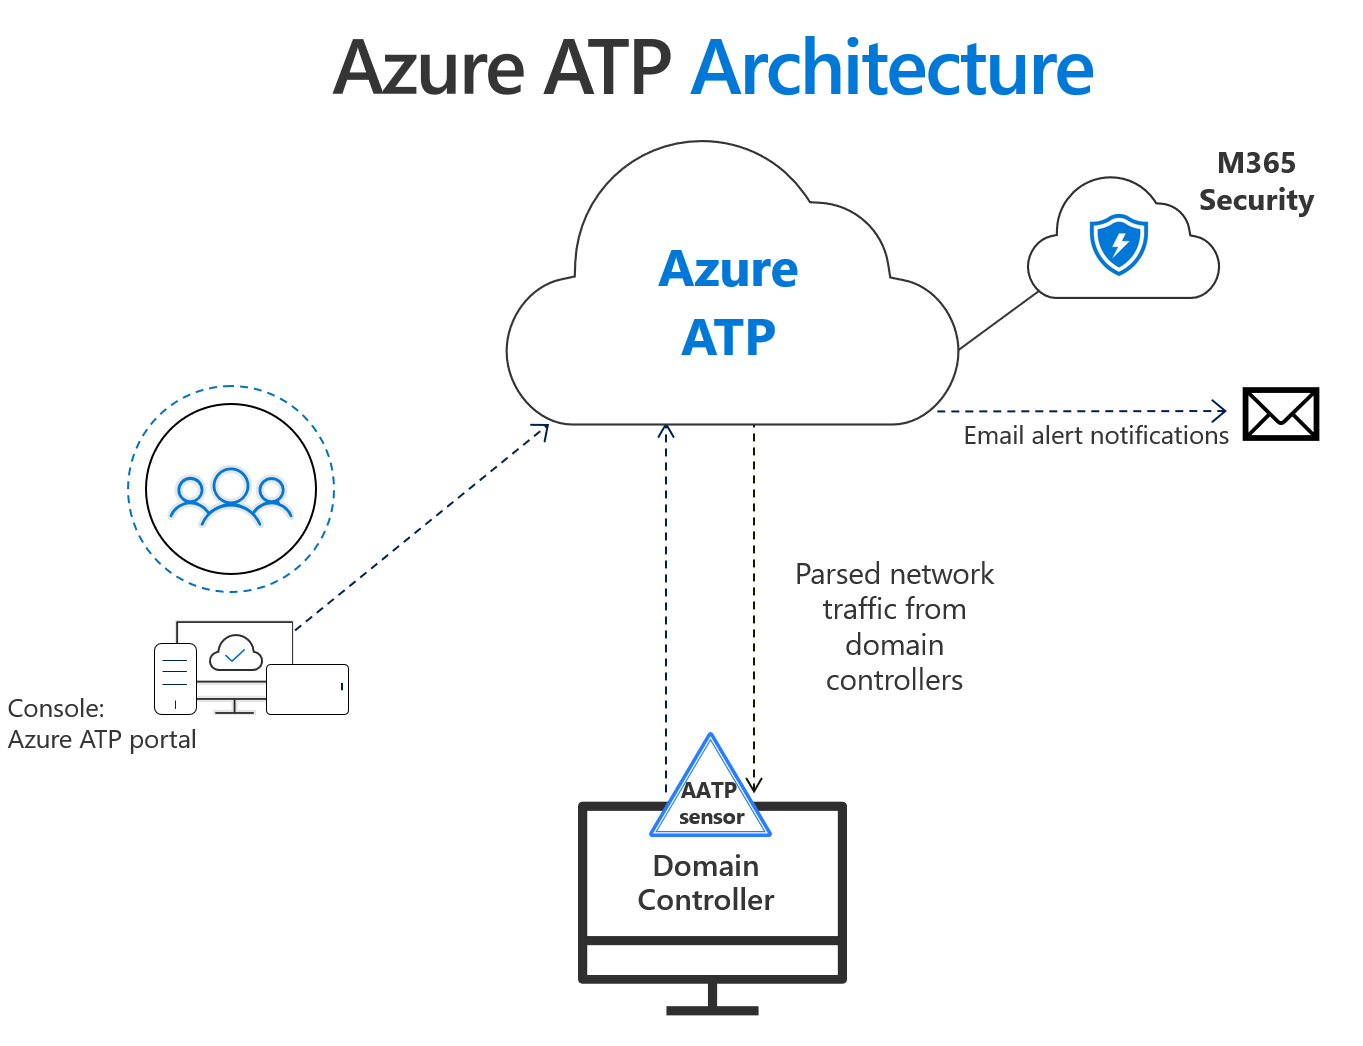 Azure Advanced Threat Protection